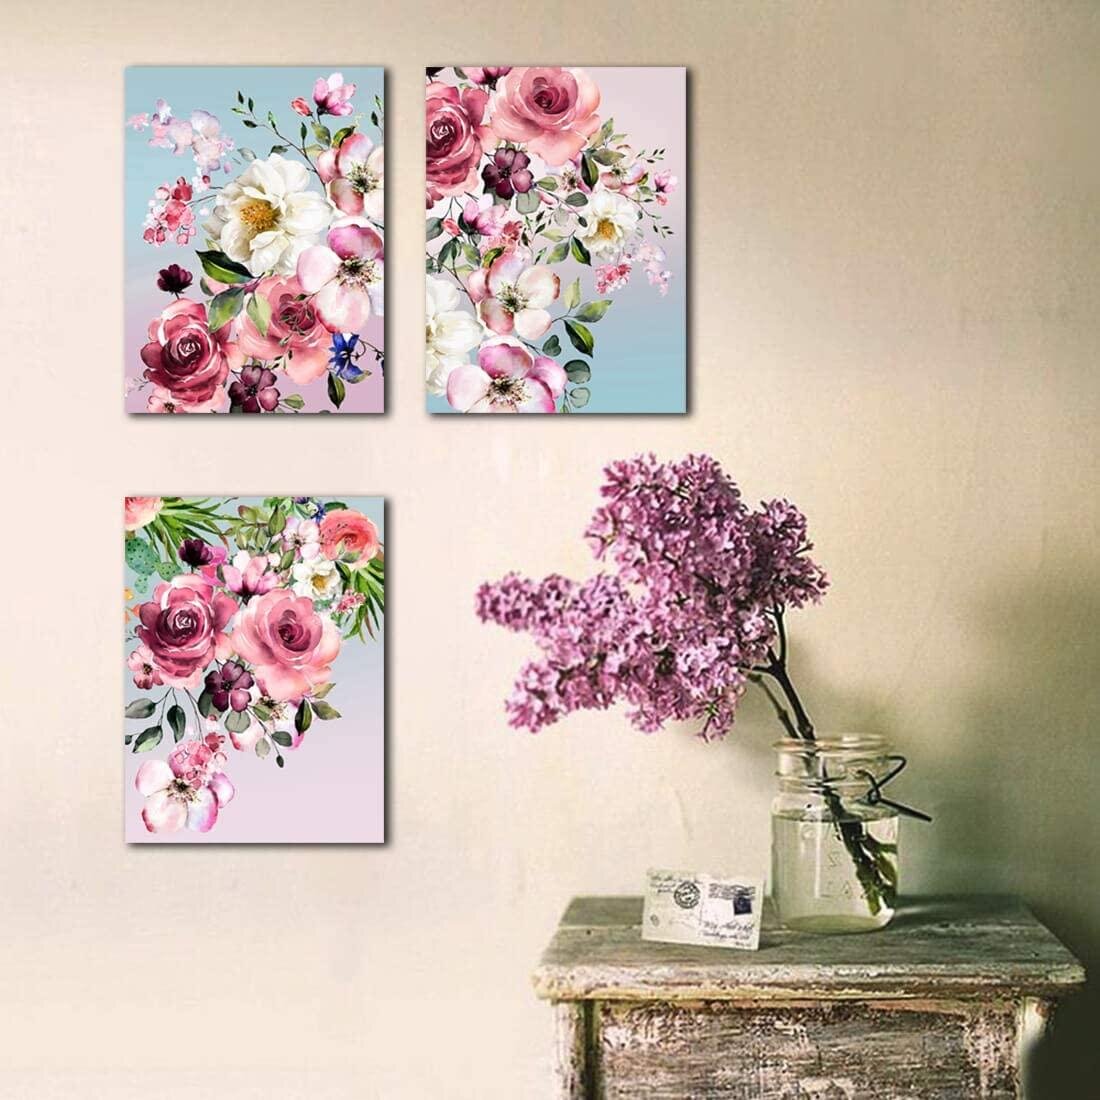 Peony Flowers 4 panels framed UV coated Canvas Ready to Hand made in Australia